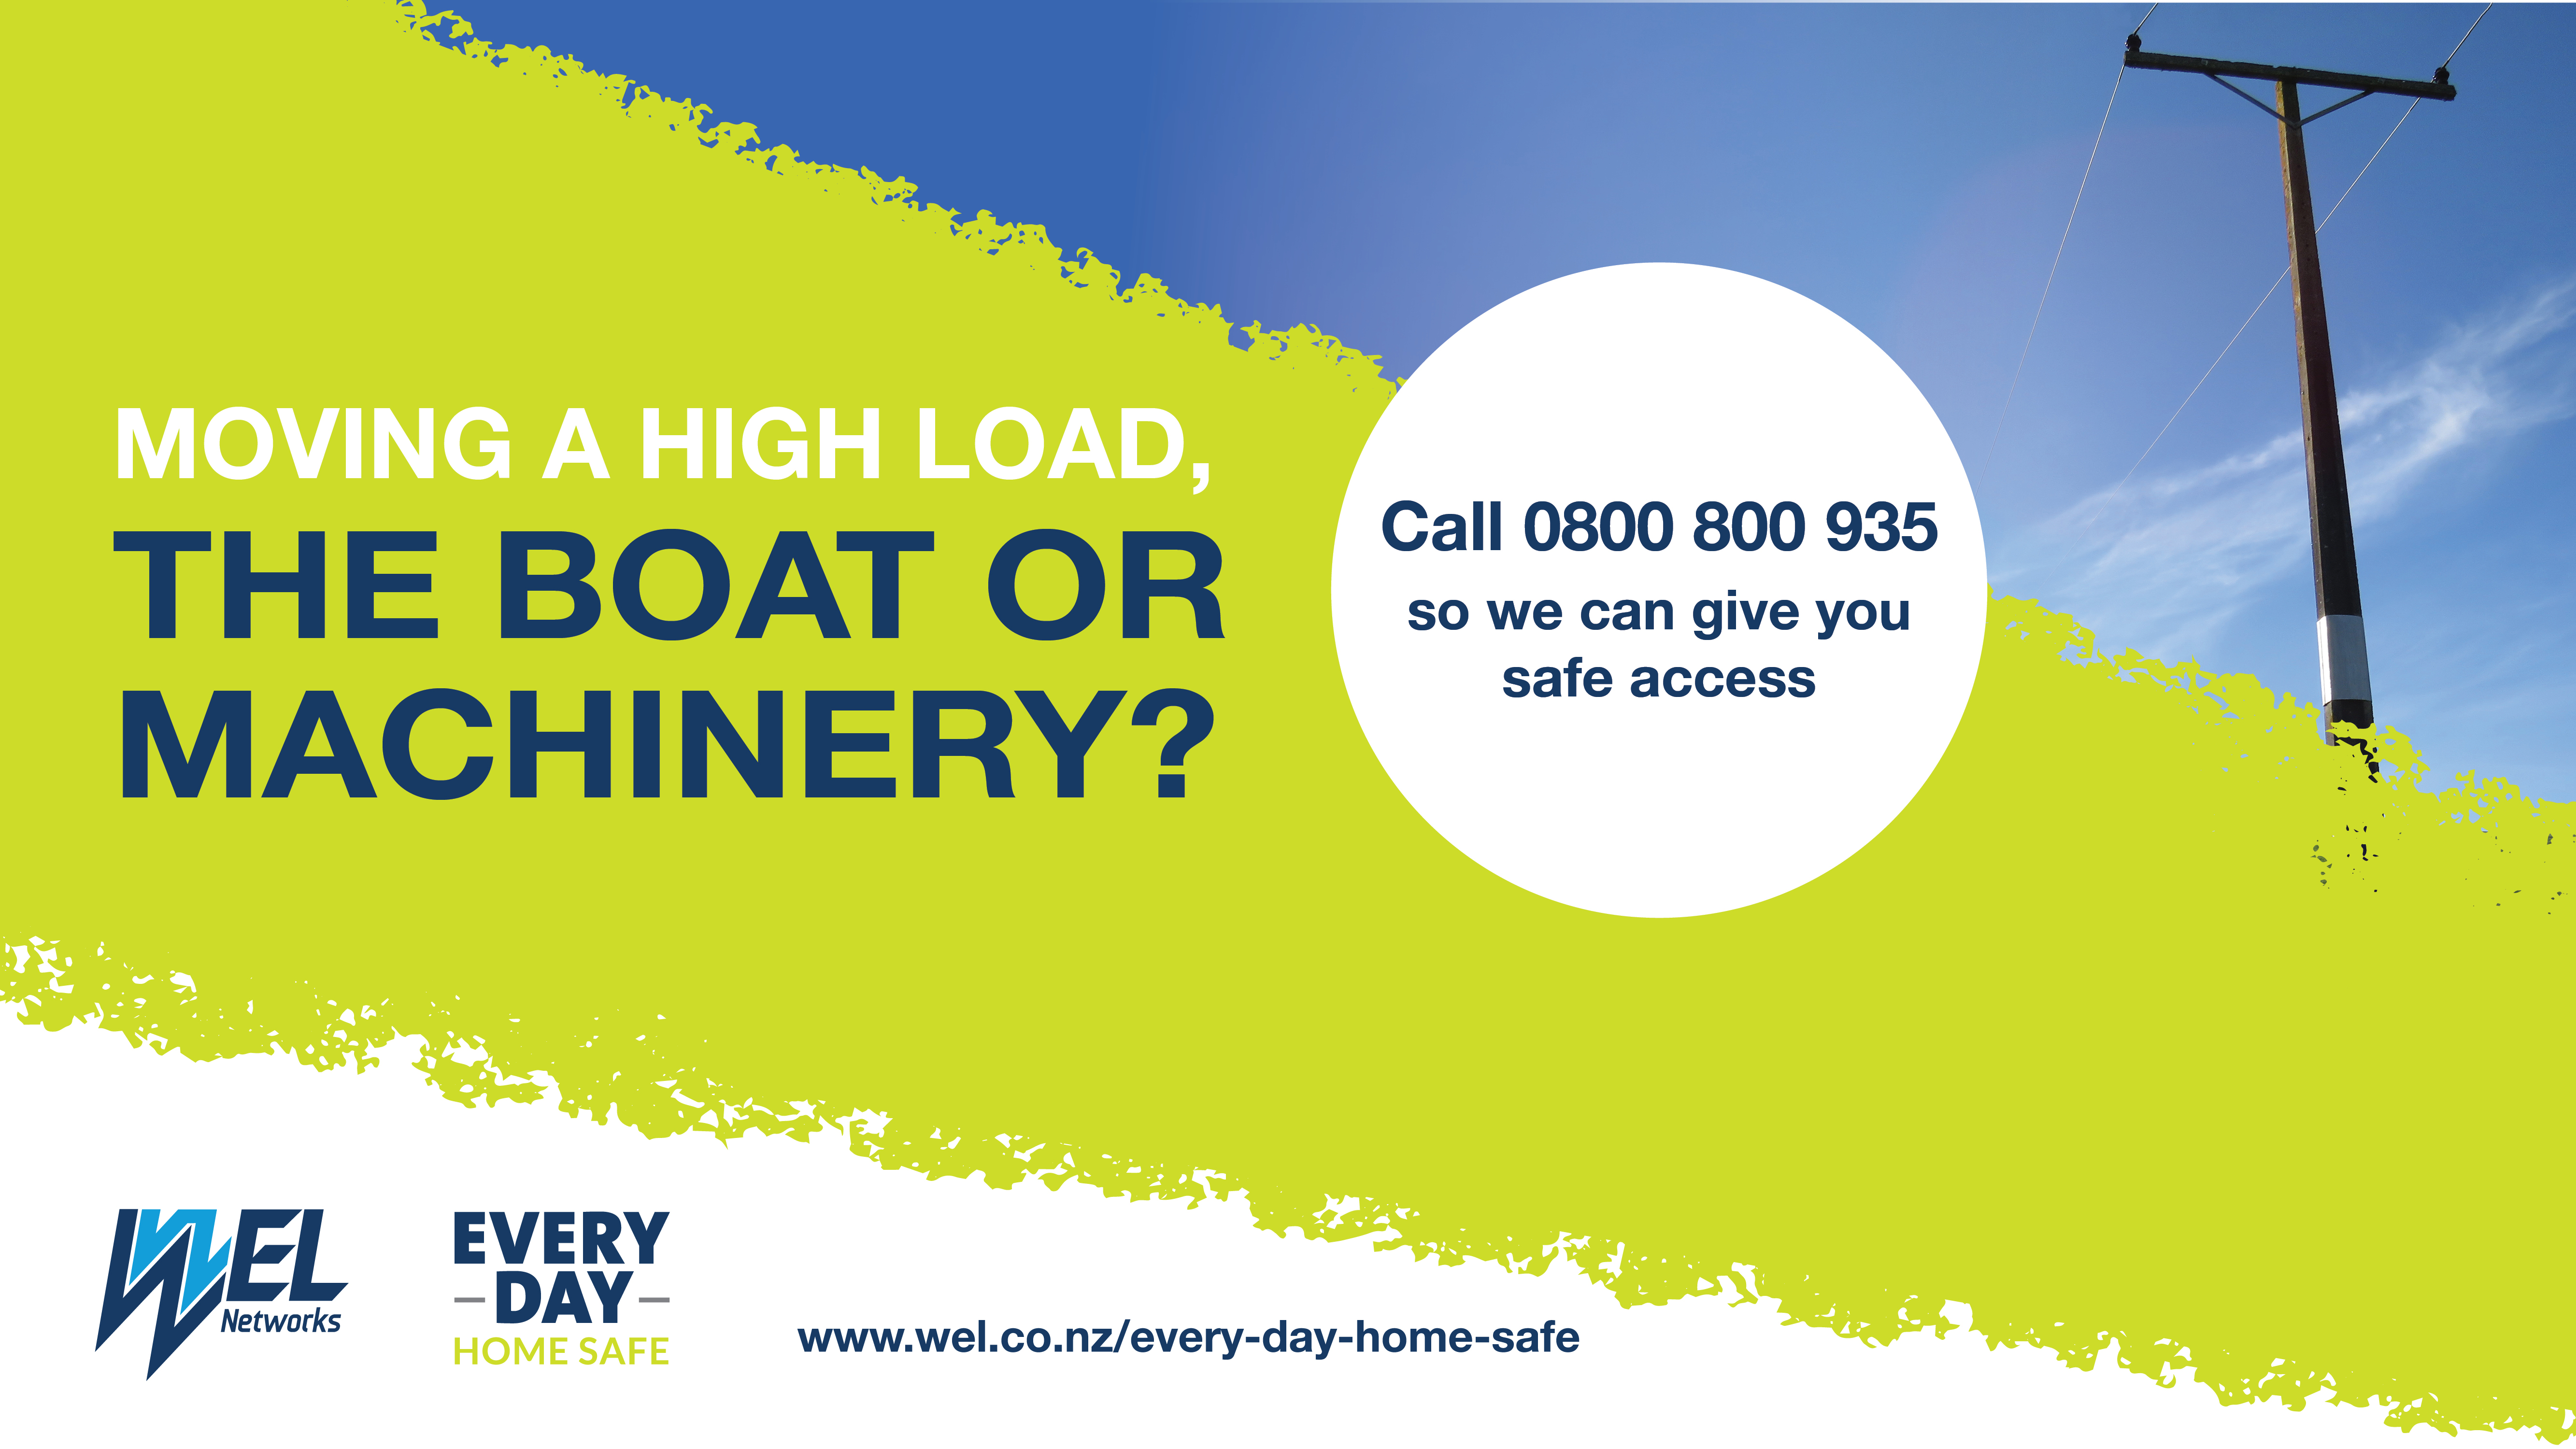 Moving a high load, the boat, or machinery? Call 0800 800 935 so we can give you safe access